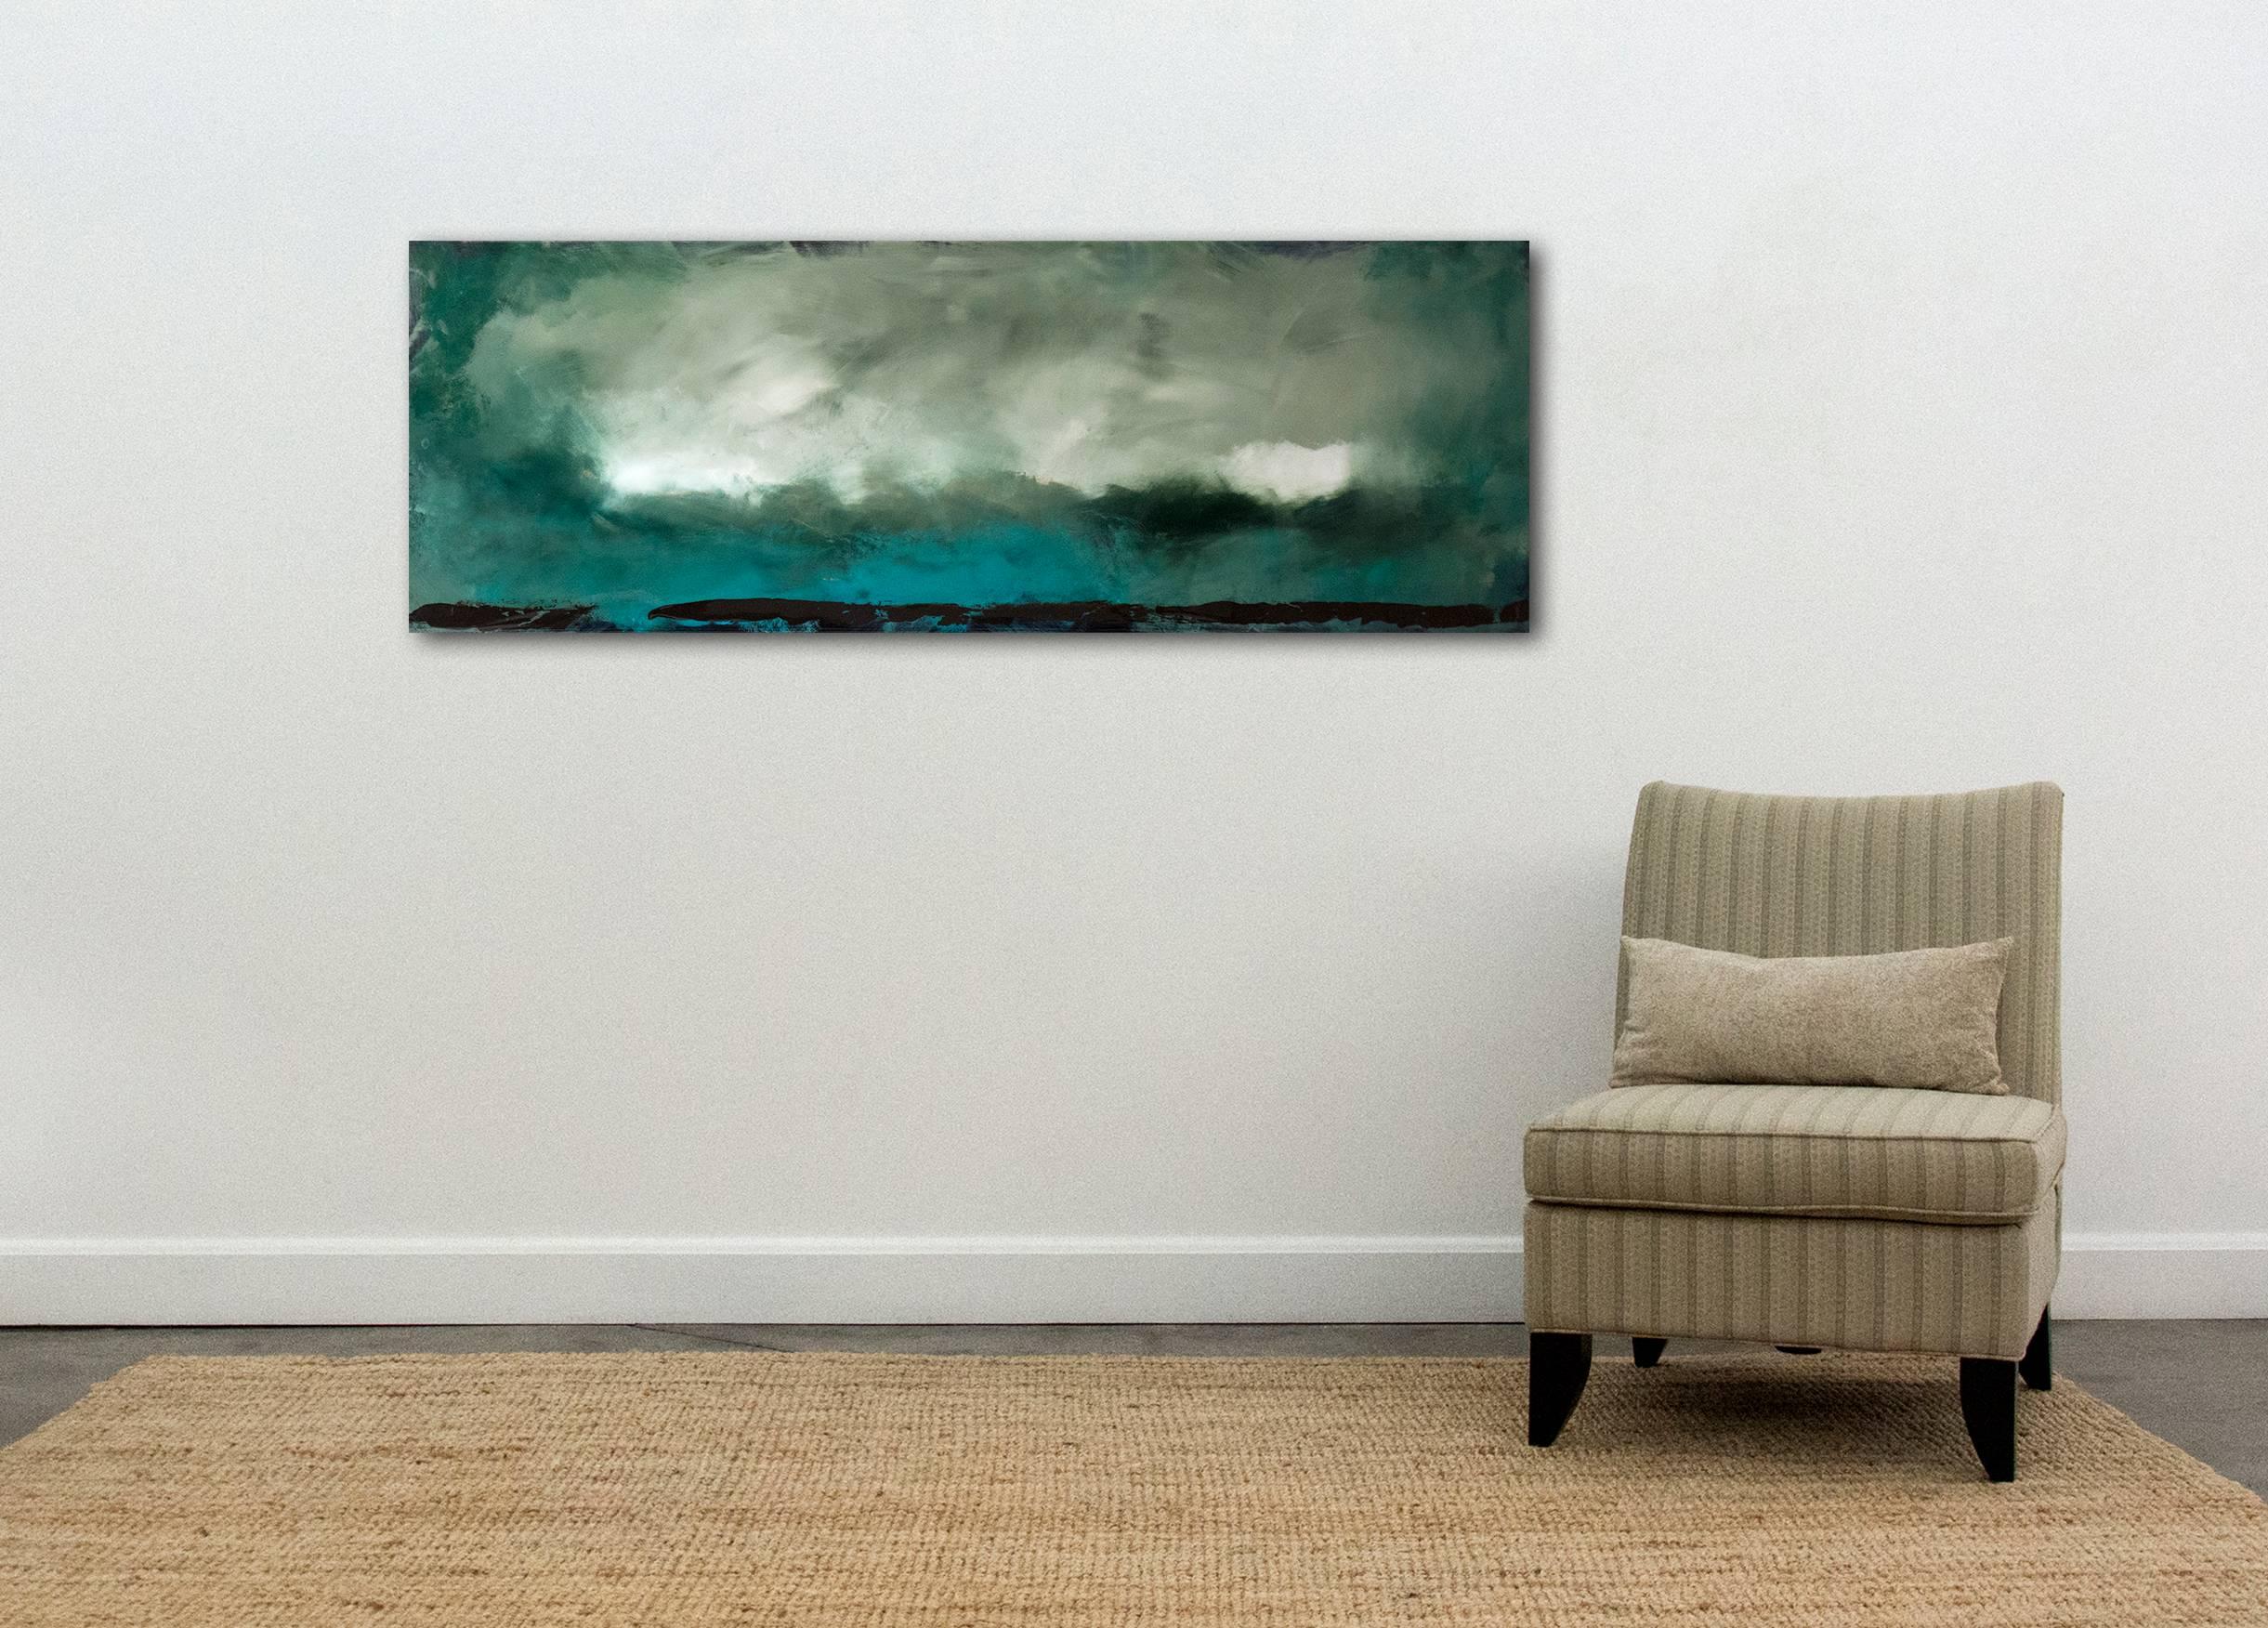 A vast, stormy cloud advances through an azure sky in this moody landscape by Jay Hodgins. Layers of curated colors coated in a glossy resin create depth and light in this atmospheric painting. This work is part of the Rujuh series. Rujuh is